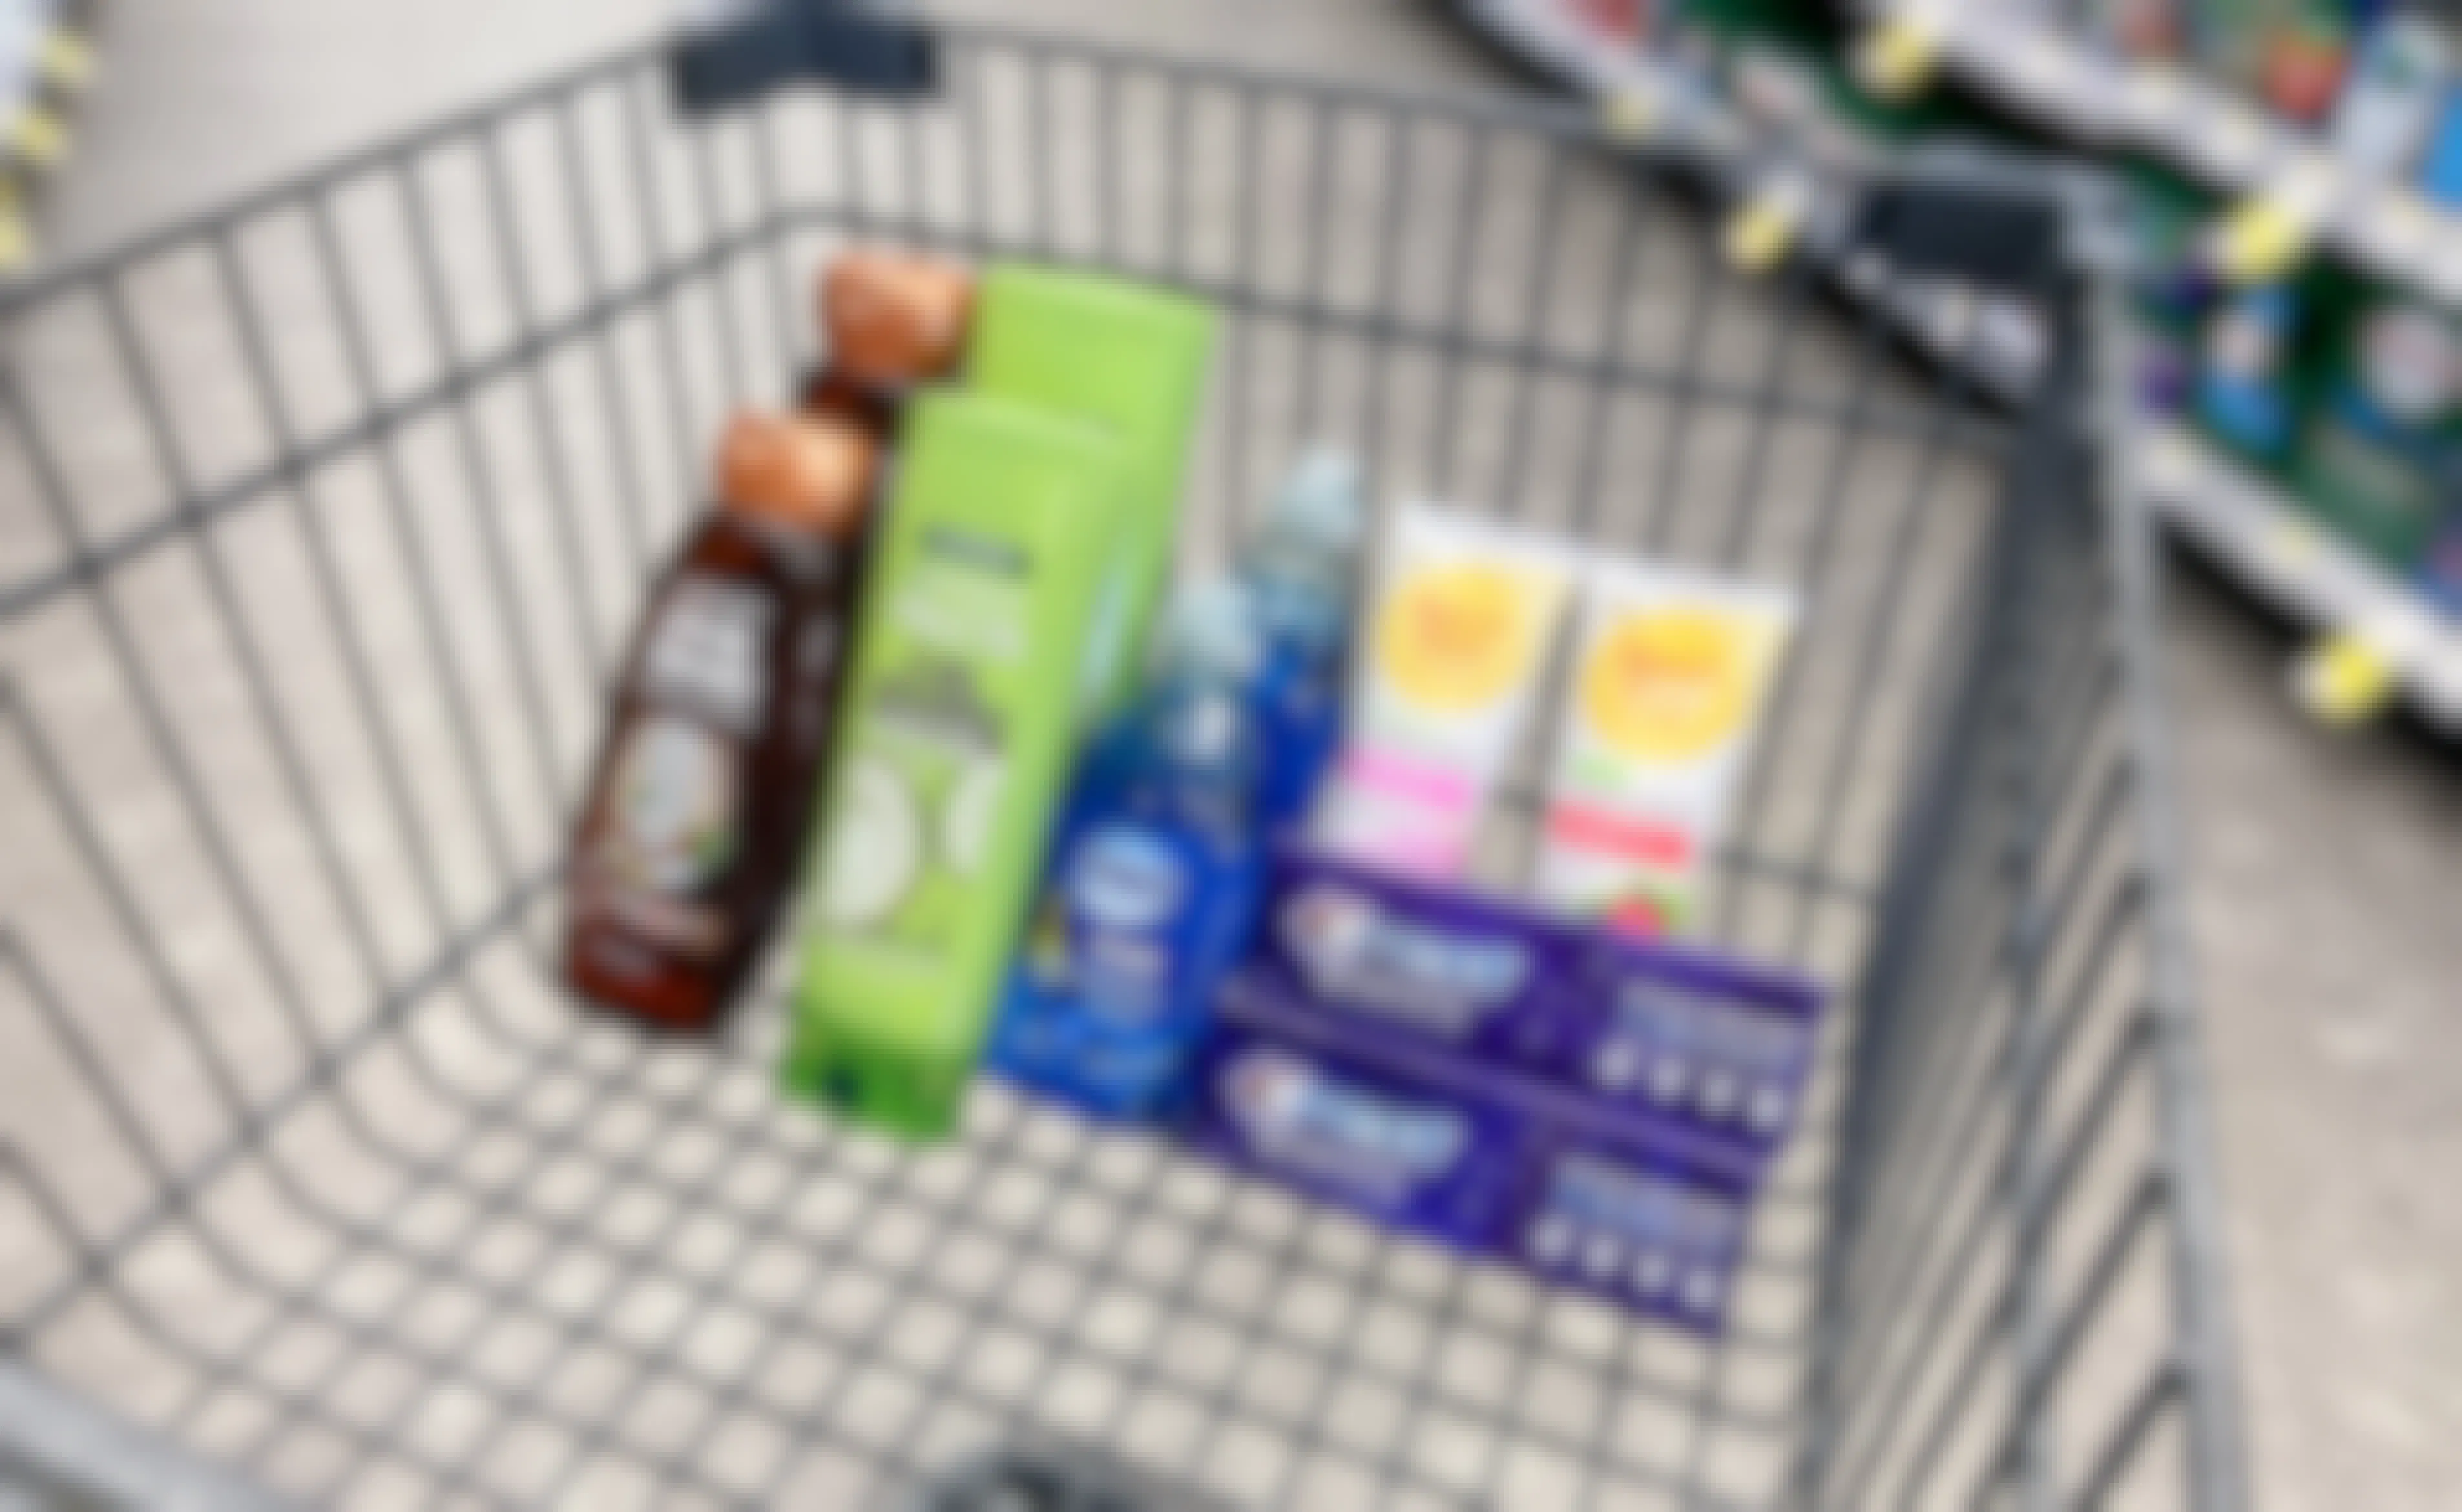 walgreens cart with garnier whole blends and fructis shampoo and conditioner, dawn dish soap, burts bees toothpaste, crest toothpaste